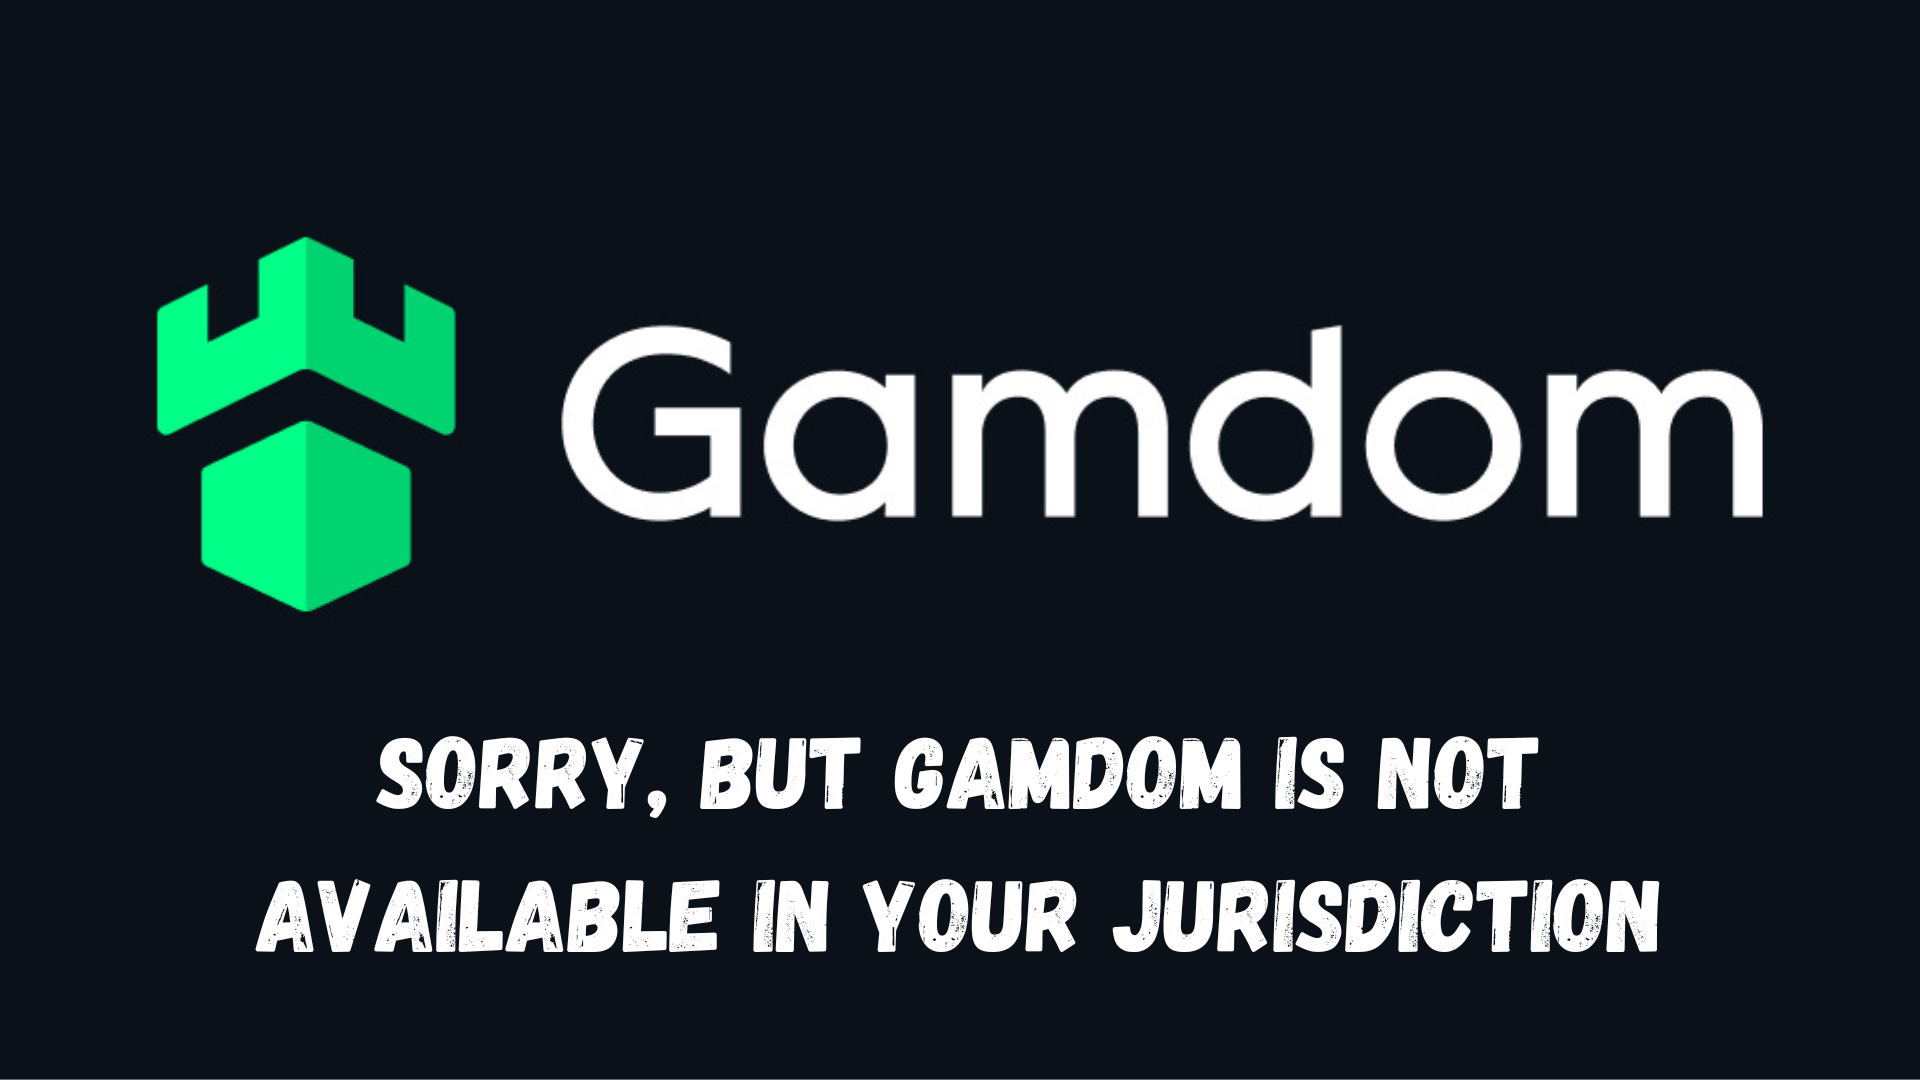 Sorry, but Gamdom is Not Available in Your Jurisdiction